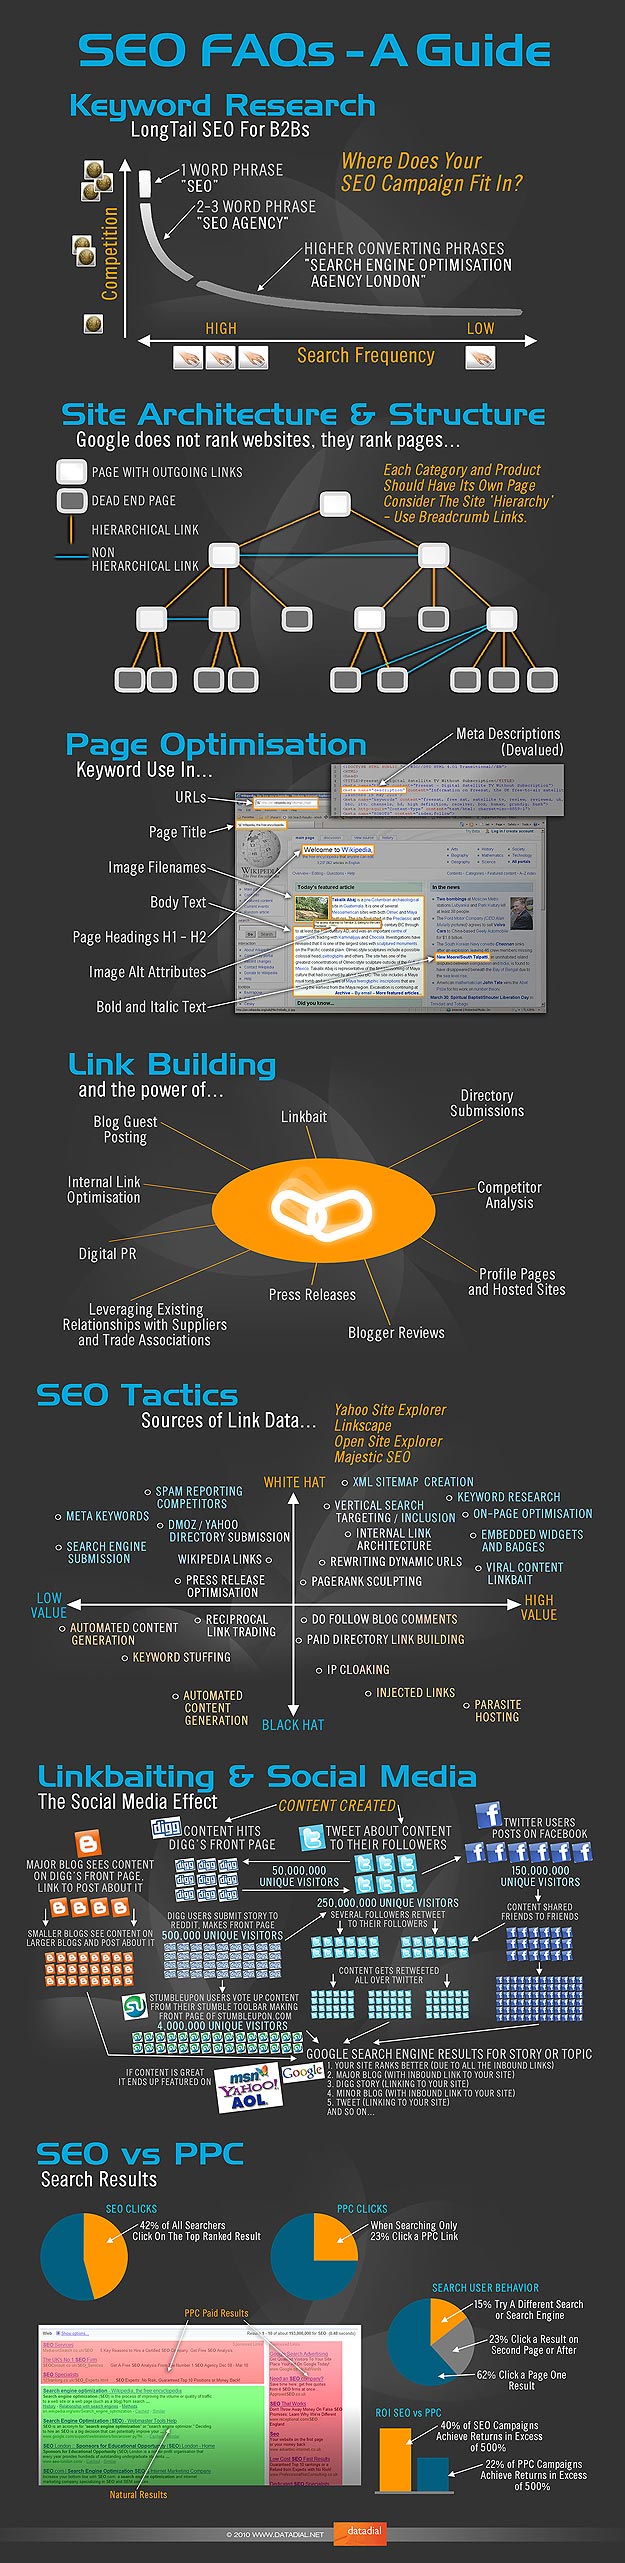 SEO For Dummies: A Beginner’s Infographic